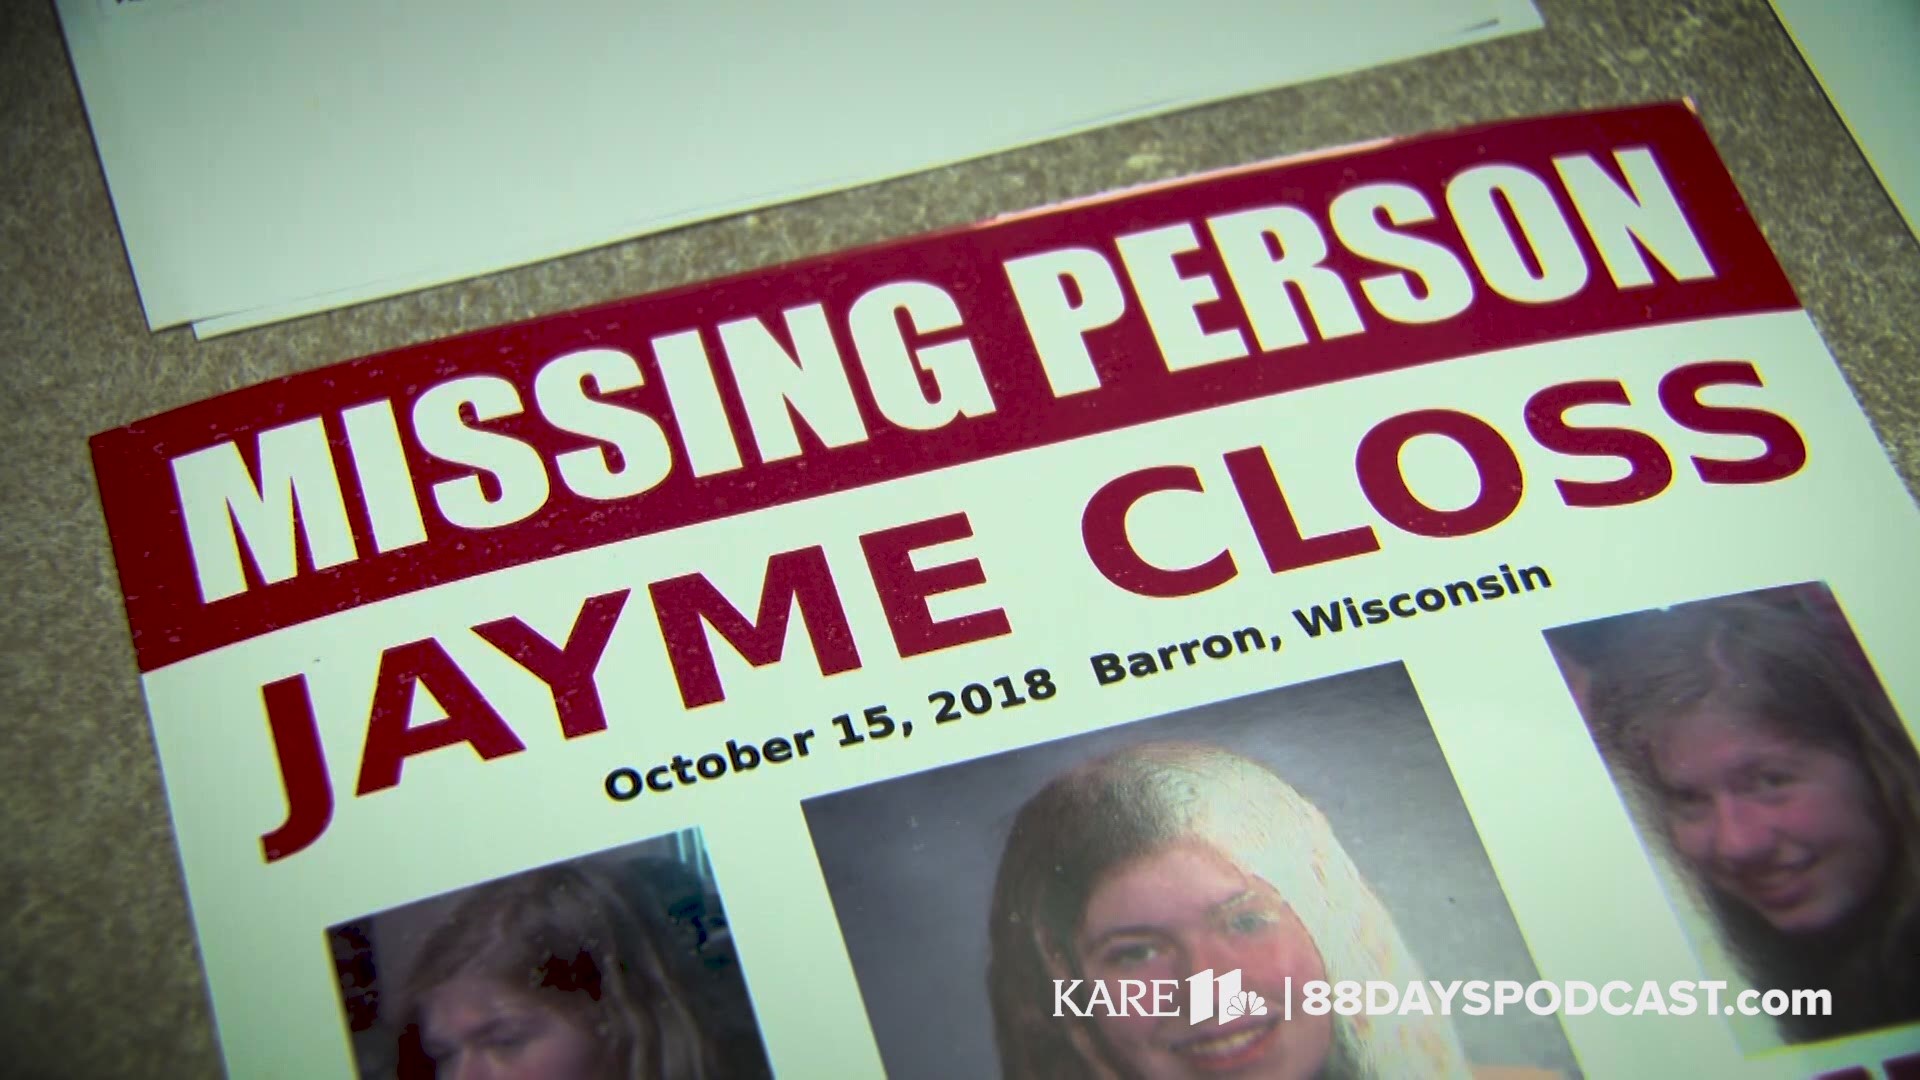 88 Days: The Jayme Closs Story is a new KARE 11 podcast that takes listeners inside the case with in-depth interviews and analysis of the months-long investigation. Listen to the trailer on 88dayspodcast.com and subscribe now. New episodes are released on Tuesdays, starting Aug. 6.